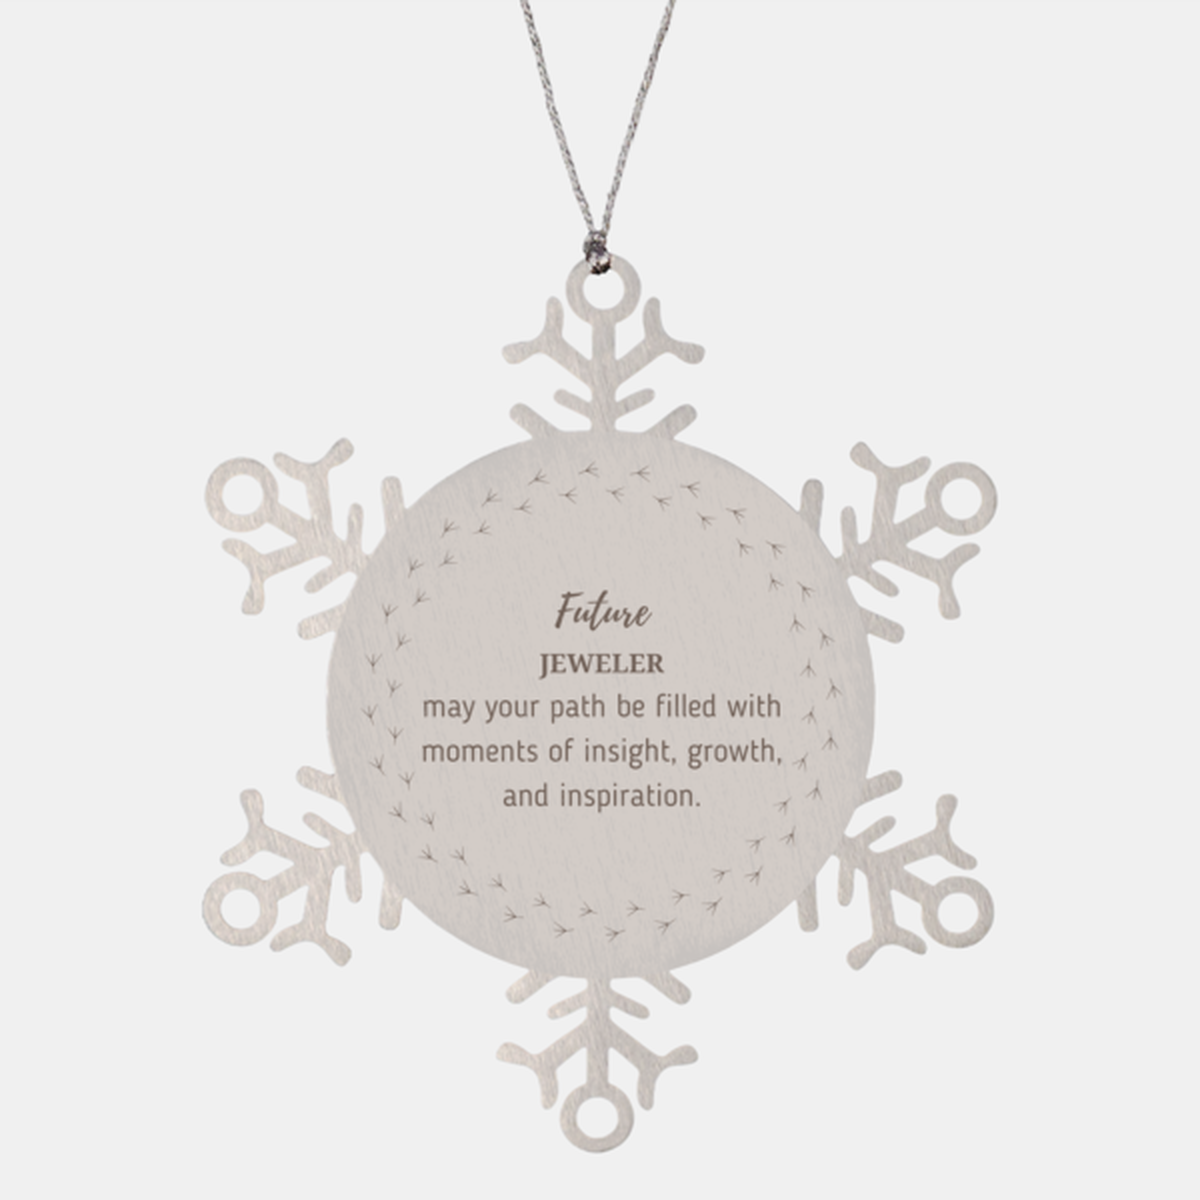 Future Jeweler Gifts, May your path be filled with moments of insight, Graduation Gifts for New Jeweler, Christmas Unique Snowflake Ornament For Men, Women, Friends